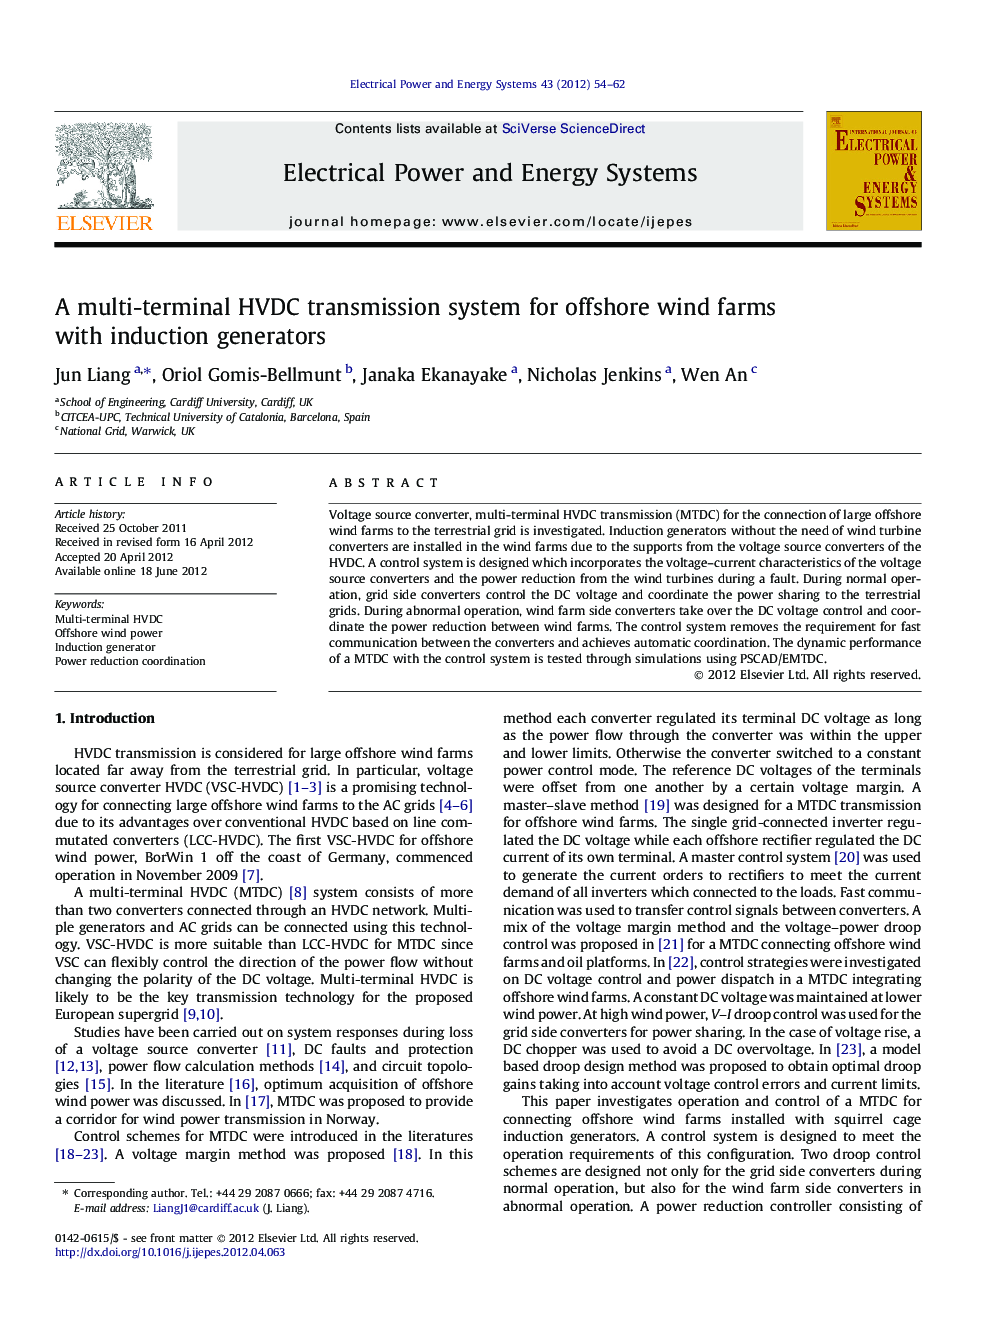 A multi-terminal HVDC transmission system for offshore wind farms with induction generators